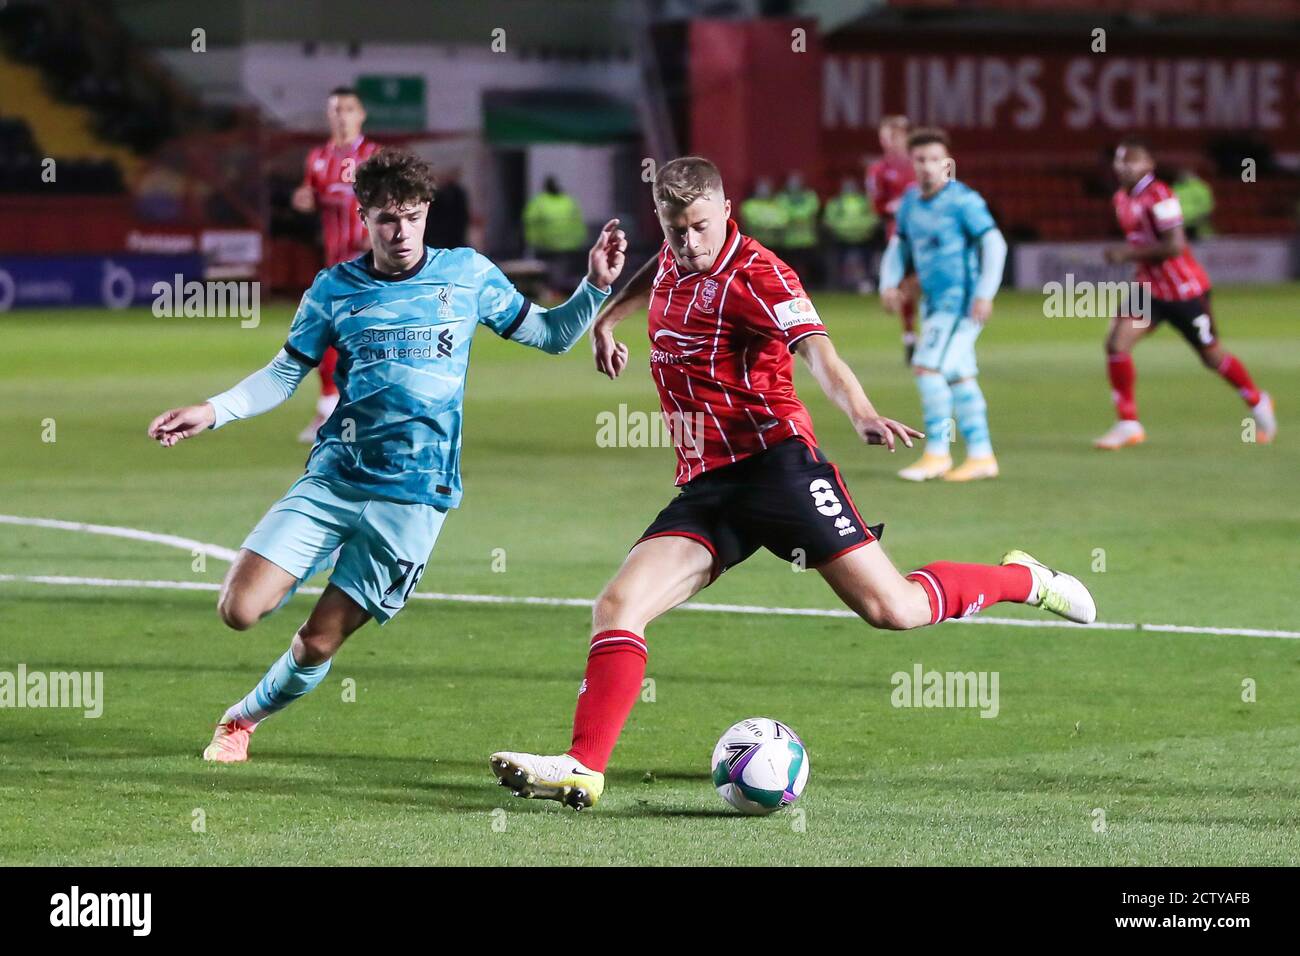 Lincoln City midfielder James Jones (8) and Liverpool defender Neco Williams (76) during the English League Cup, EFL Carabao Cup, football match betwe Stock Photo